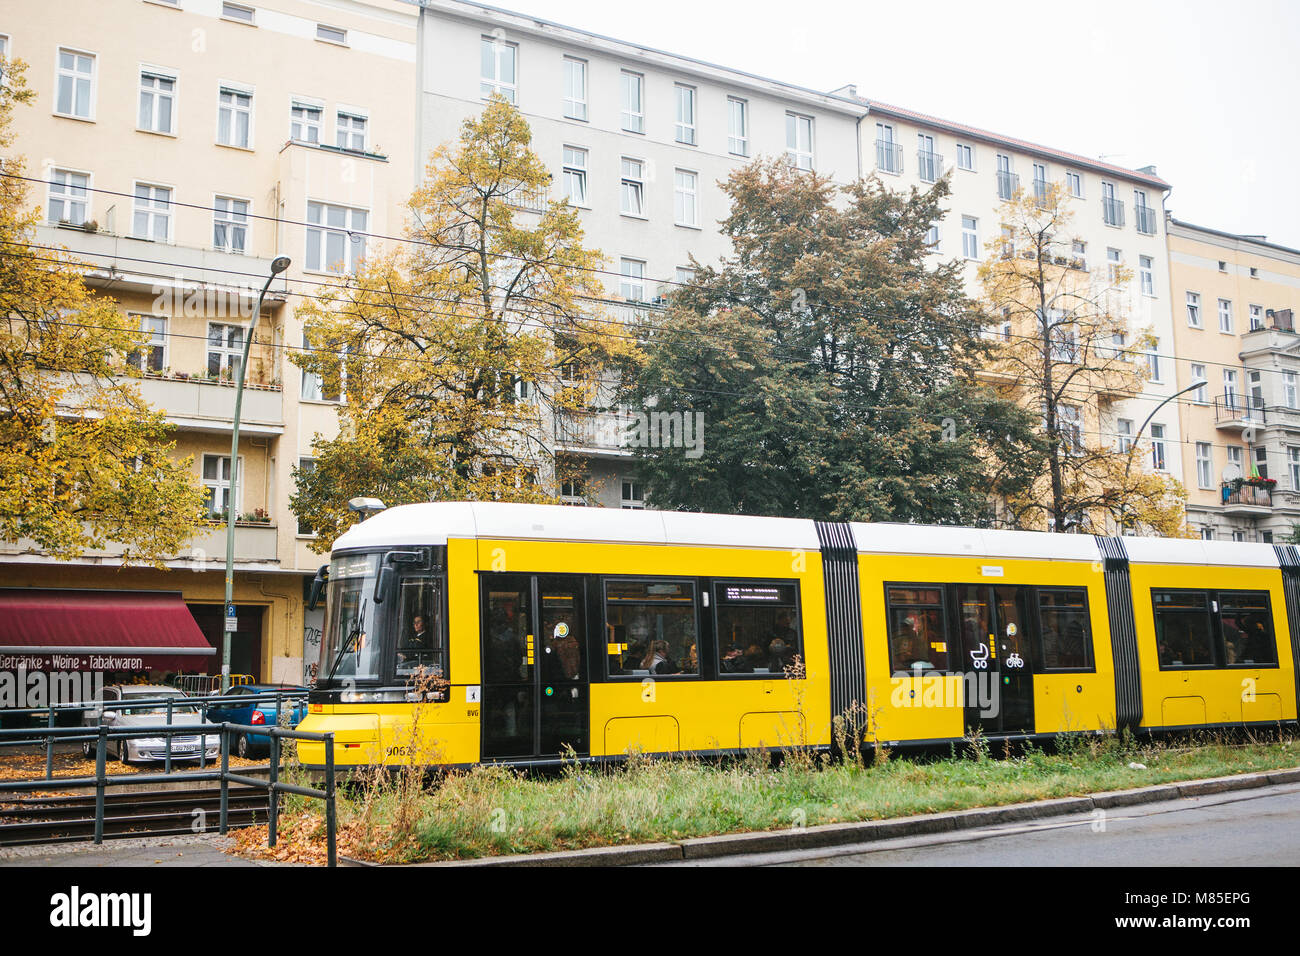 City public transport in Germany. Beautiful black and yellow train stopped at stop on the background of an old building Stock Photo